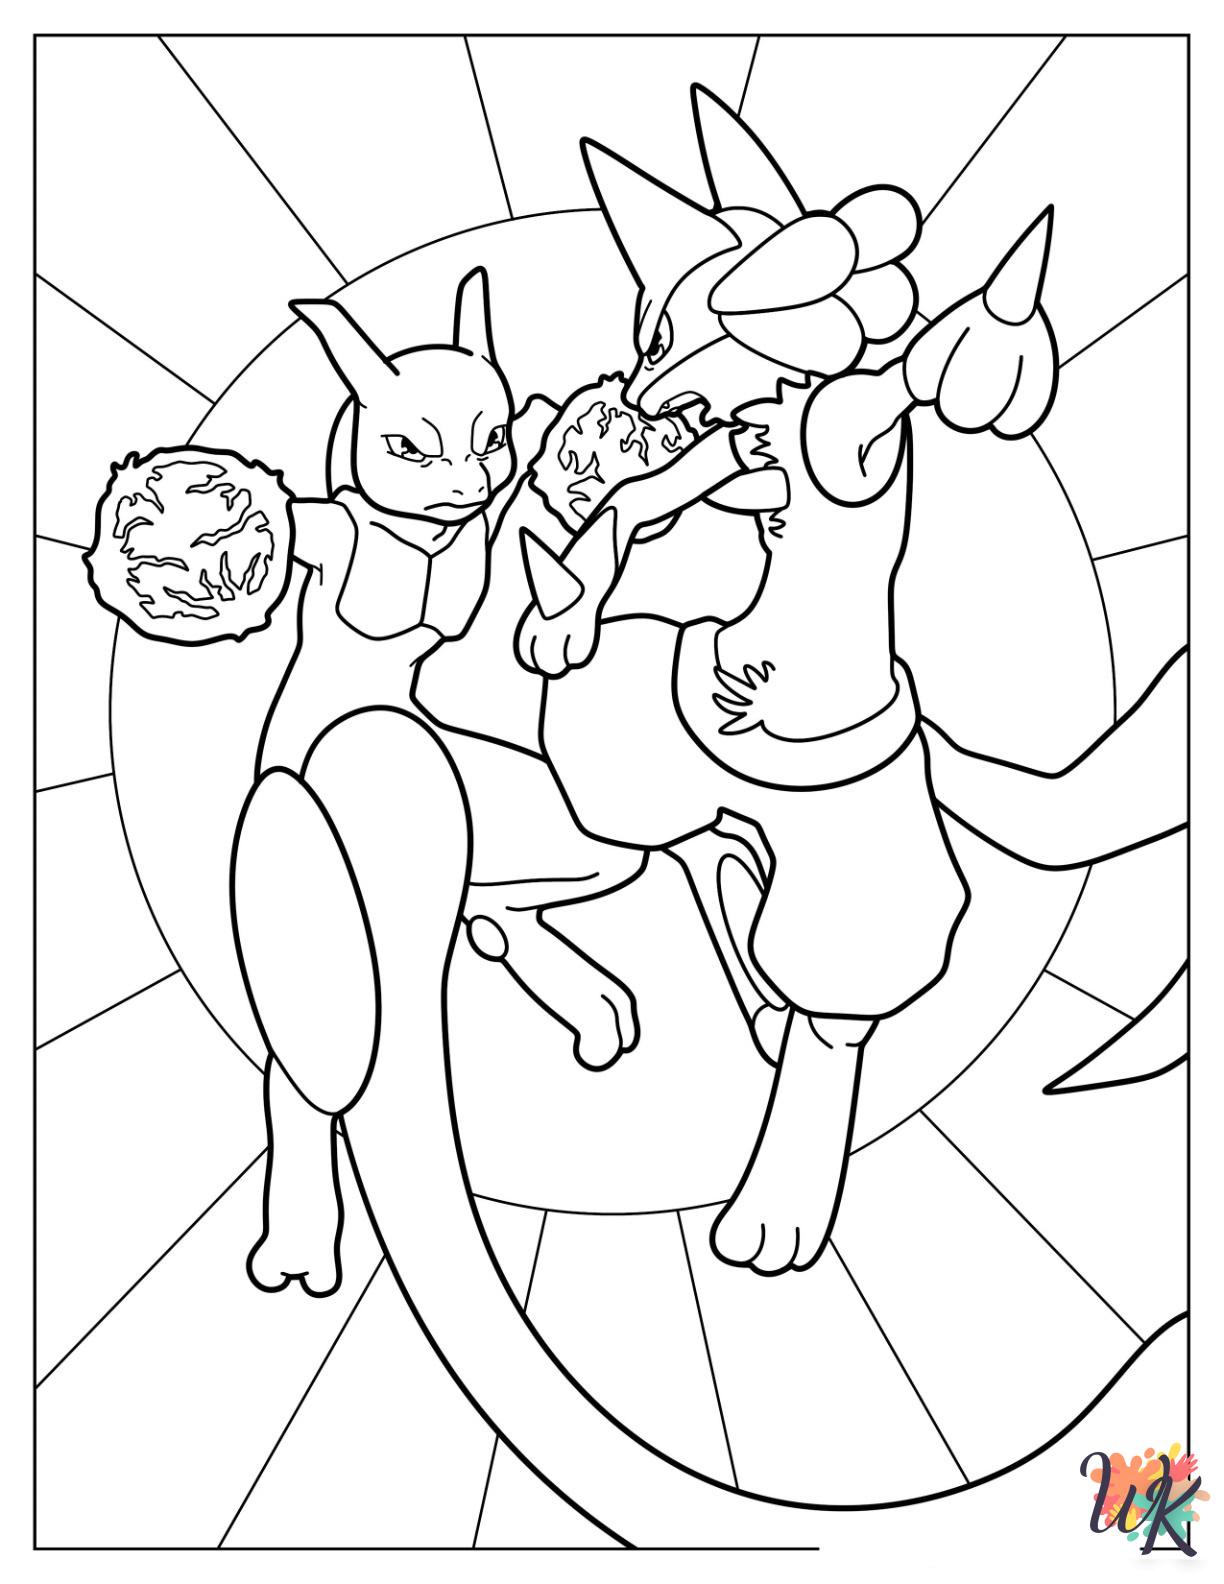 Mewtwo coloring pages to print